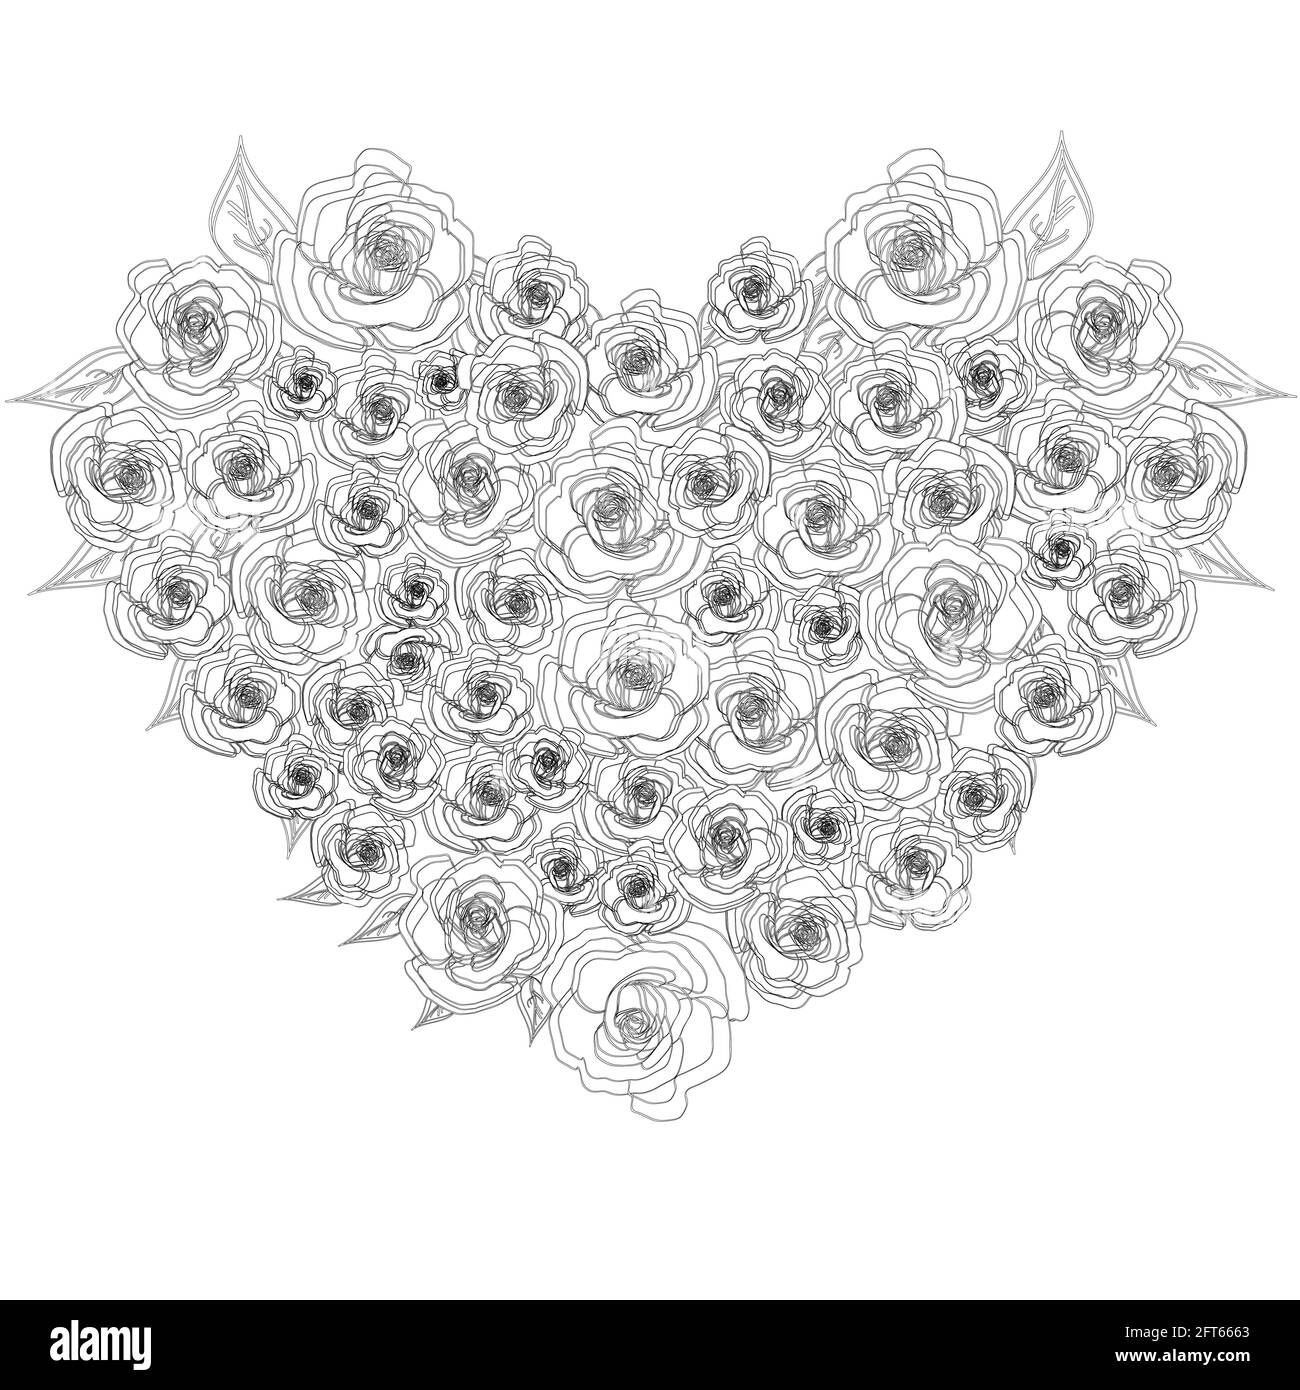 Coloring for adults and children. Heart of roses Stock Vector Image ...